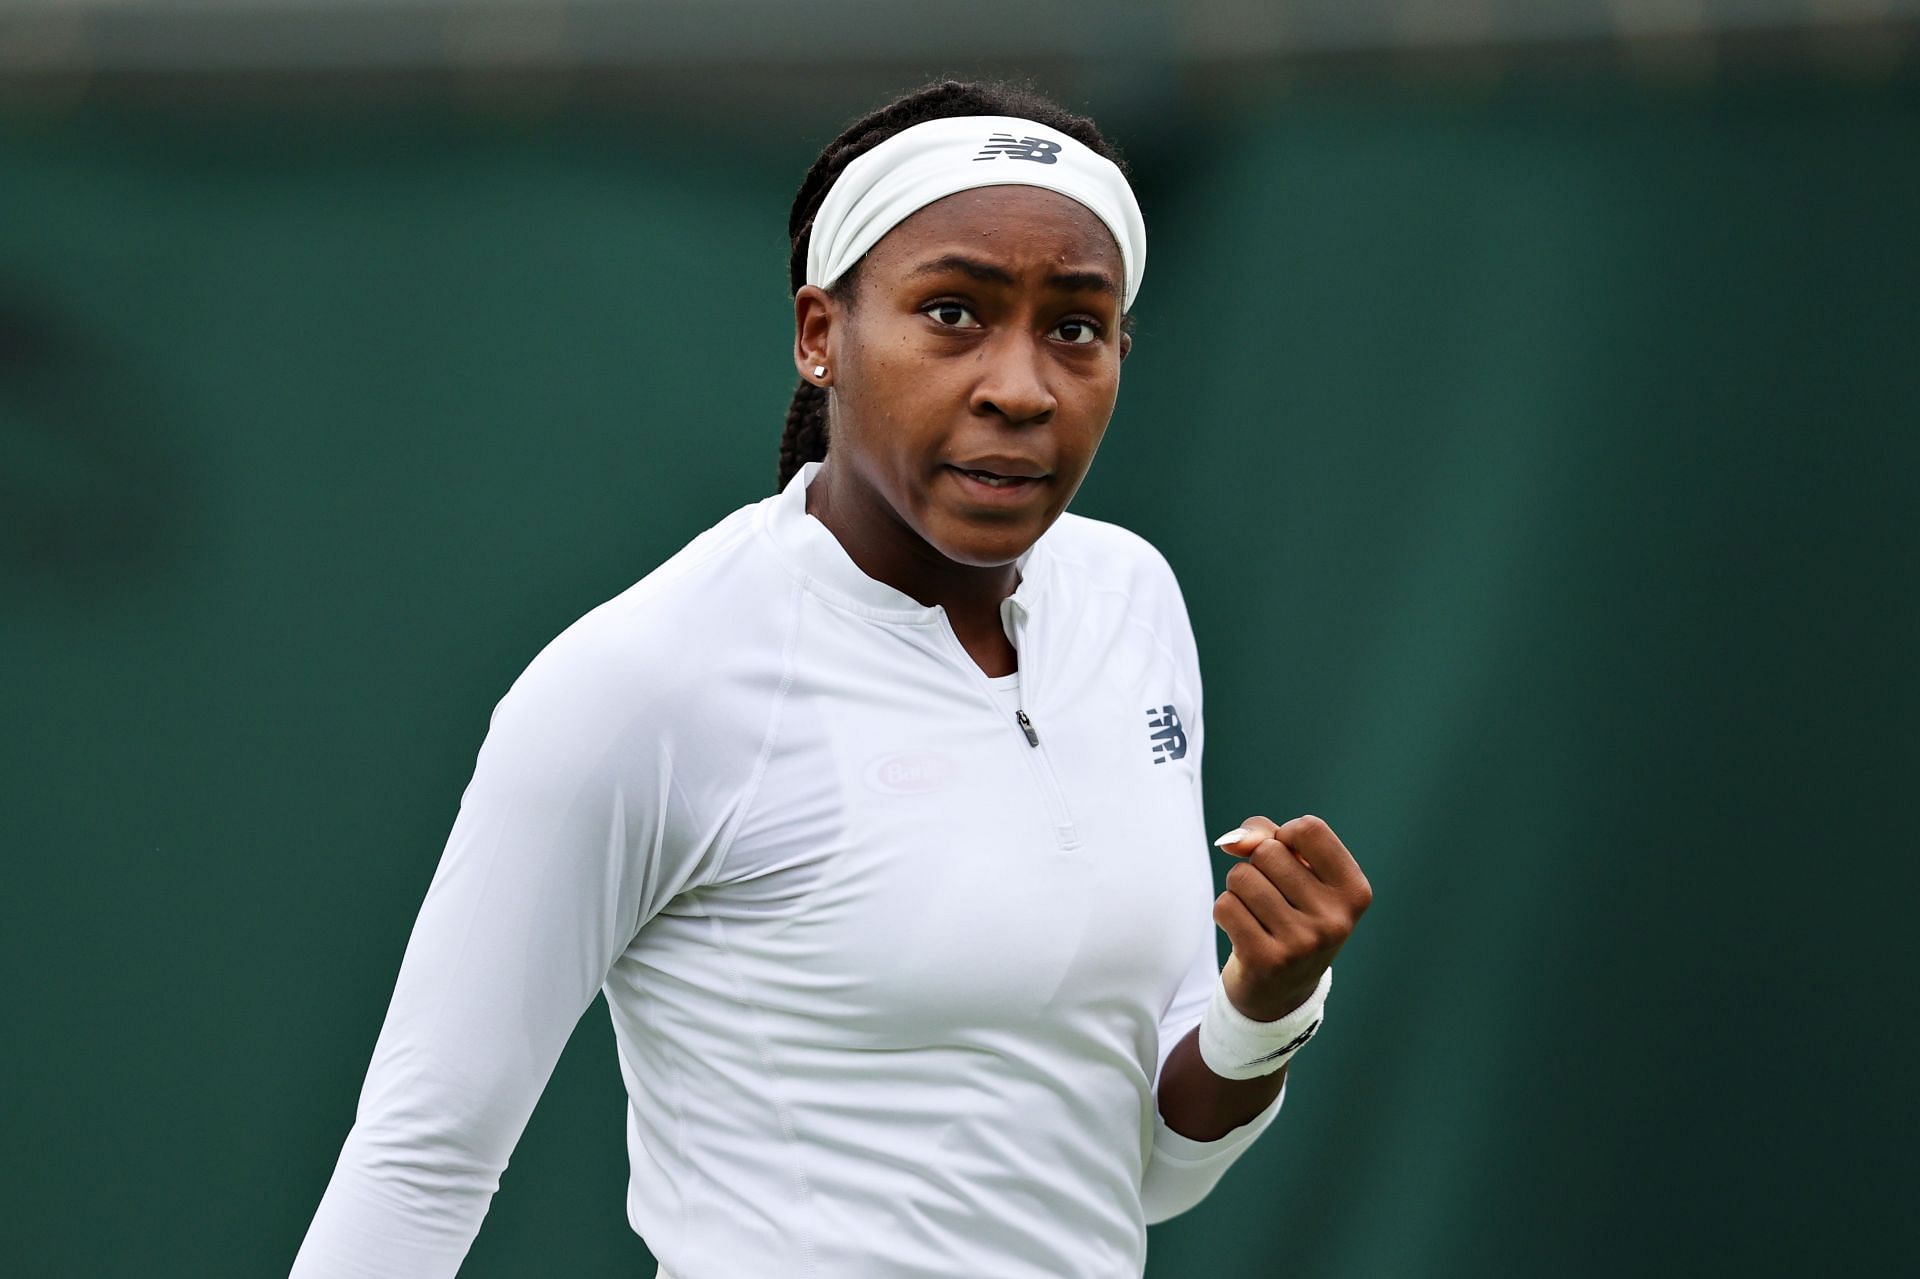 Coco Gauff will play next at the Mubadala Silicon Valley Classic in San Jose up next